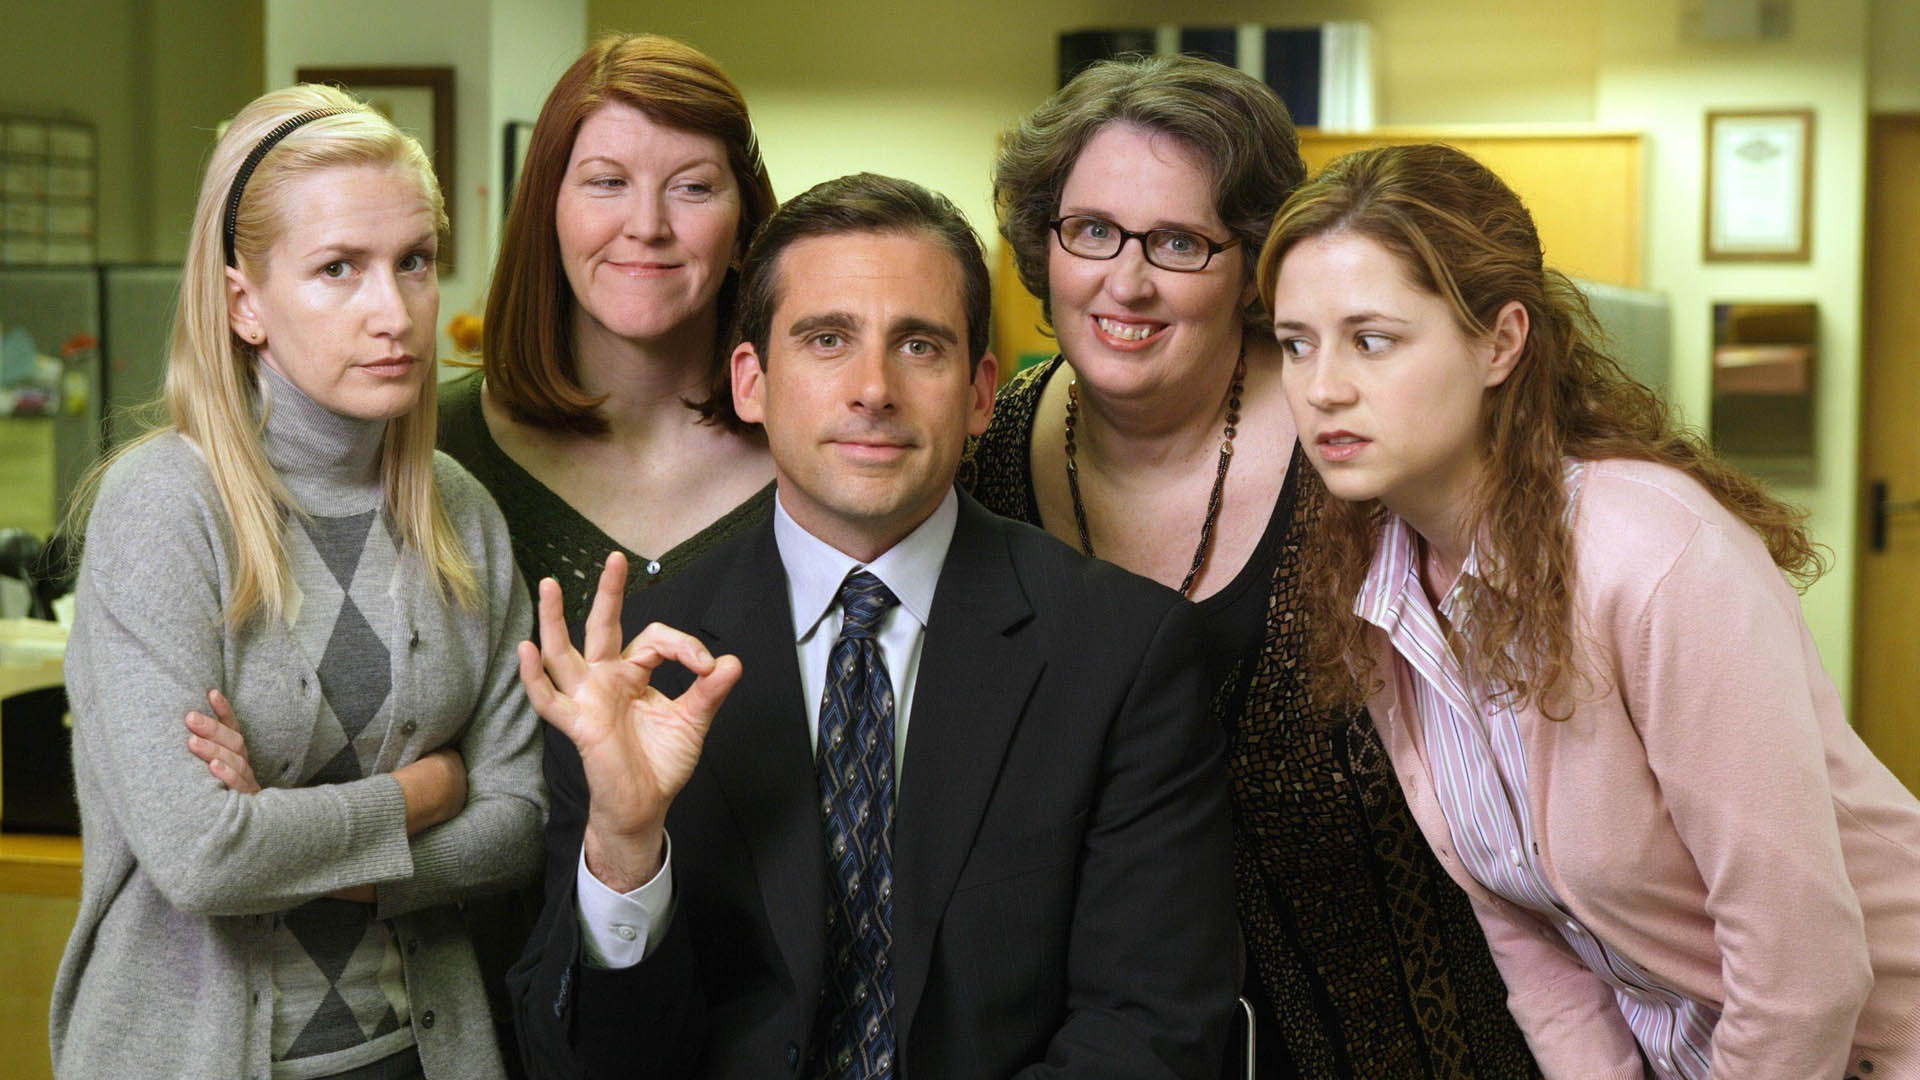 the office (us), tv show, angela kinsey, angela martin, jenna fischer, kate flannery, meredith palmer, michael scott, pam beesly, phyllis smith, phyllis vance, steve carell